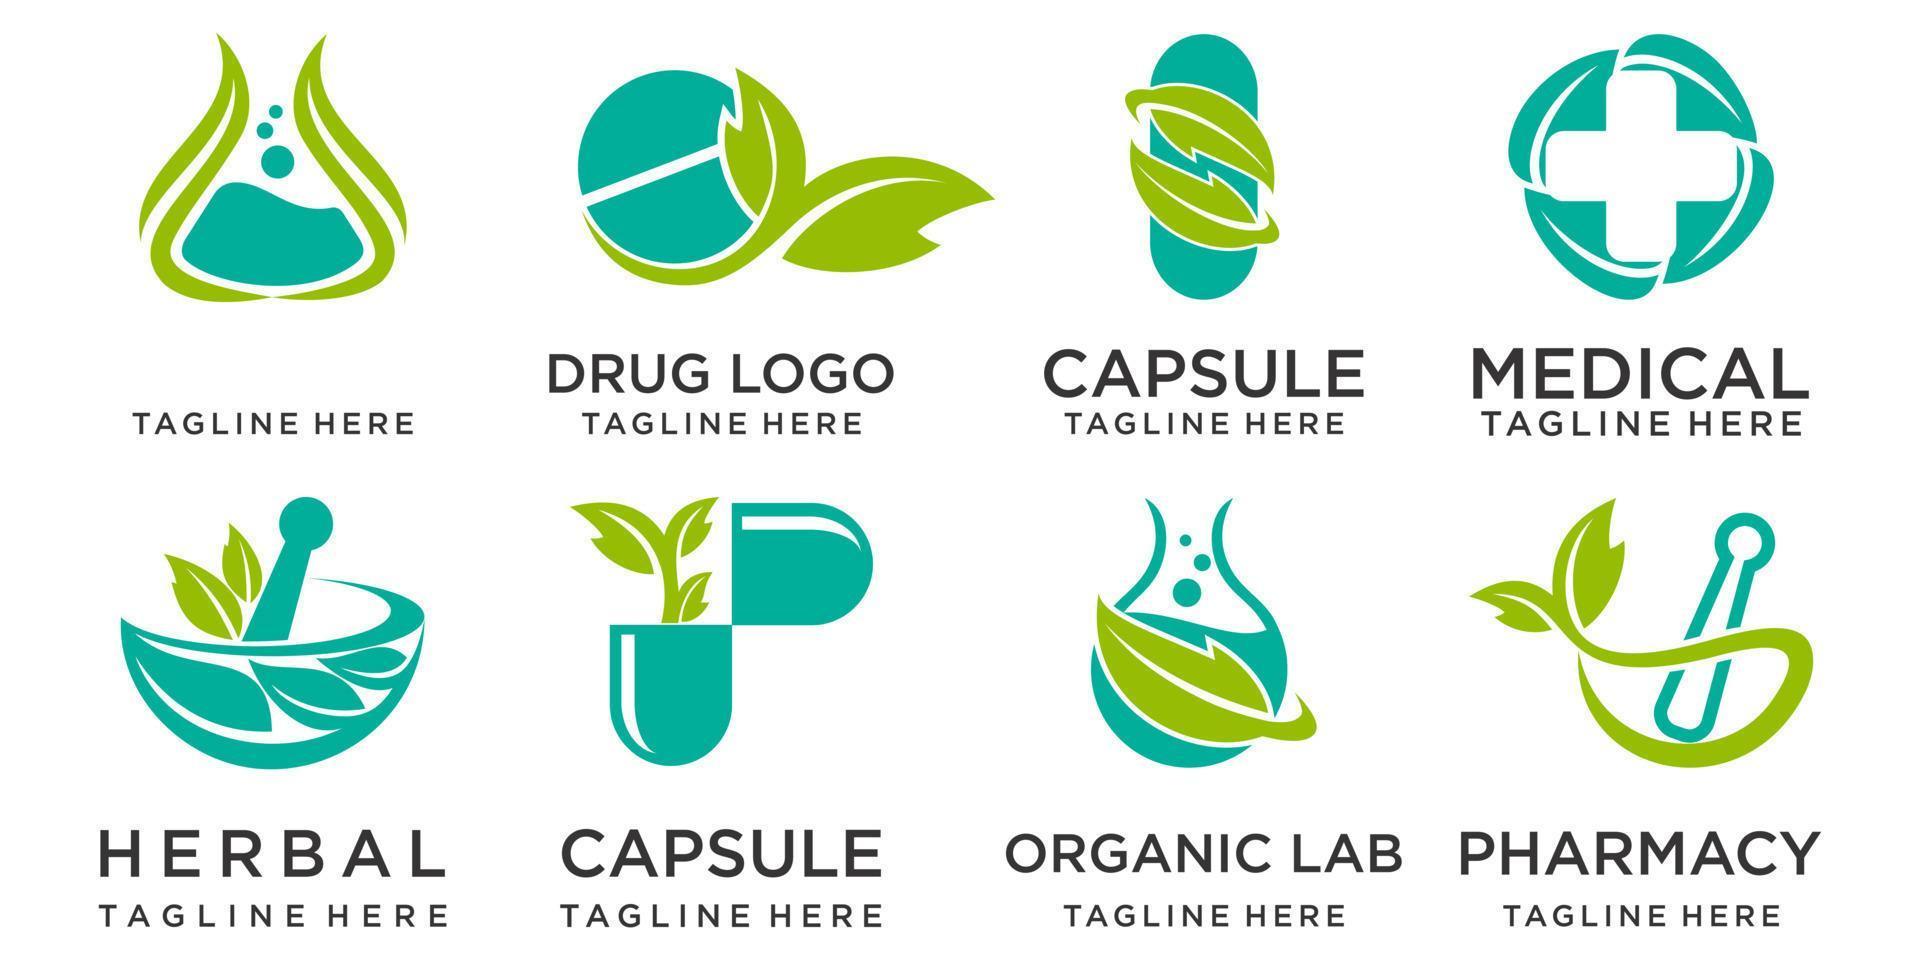 Pharmacy ,medical icons set Logo Template with Images of bottles, capsule and Leaves vector